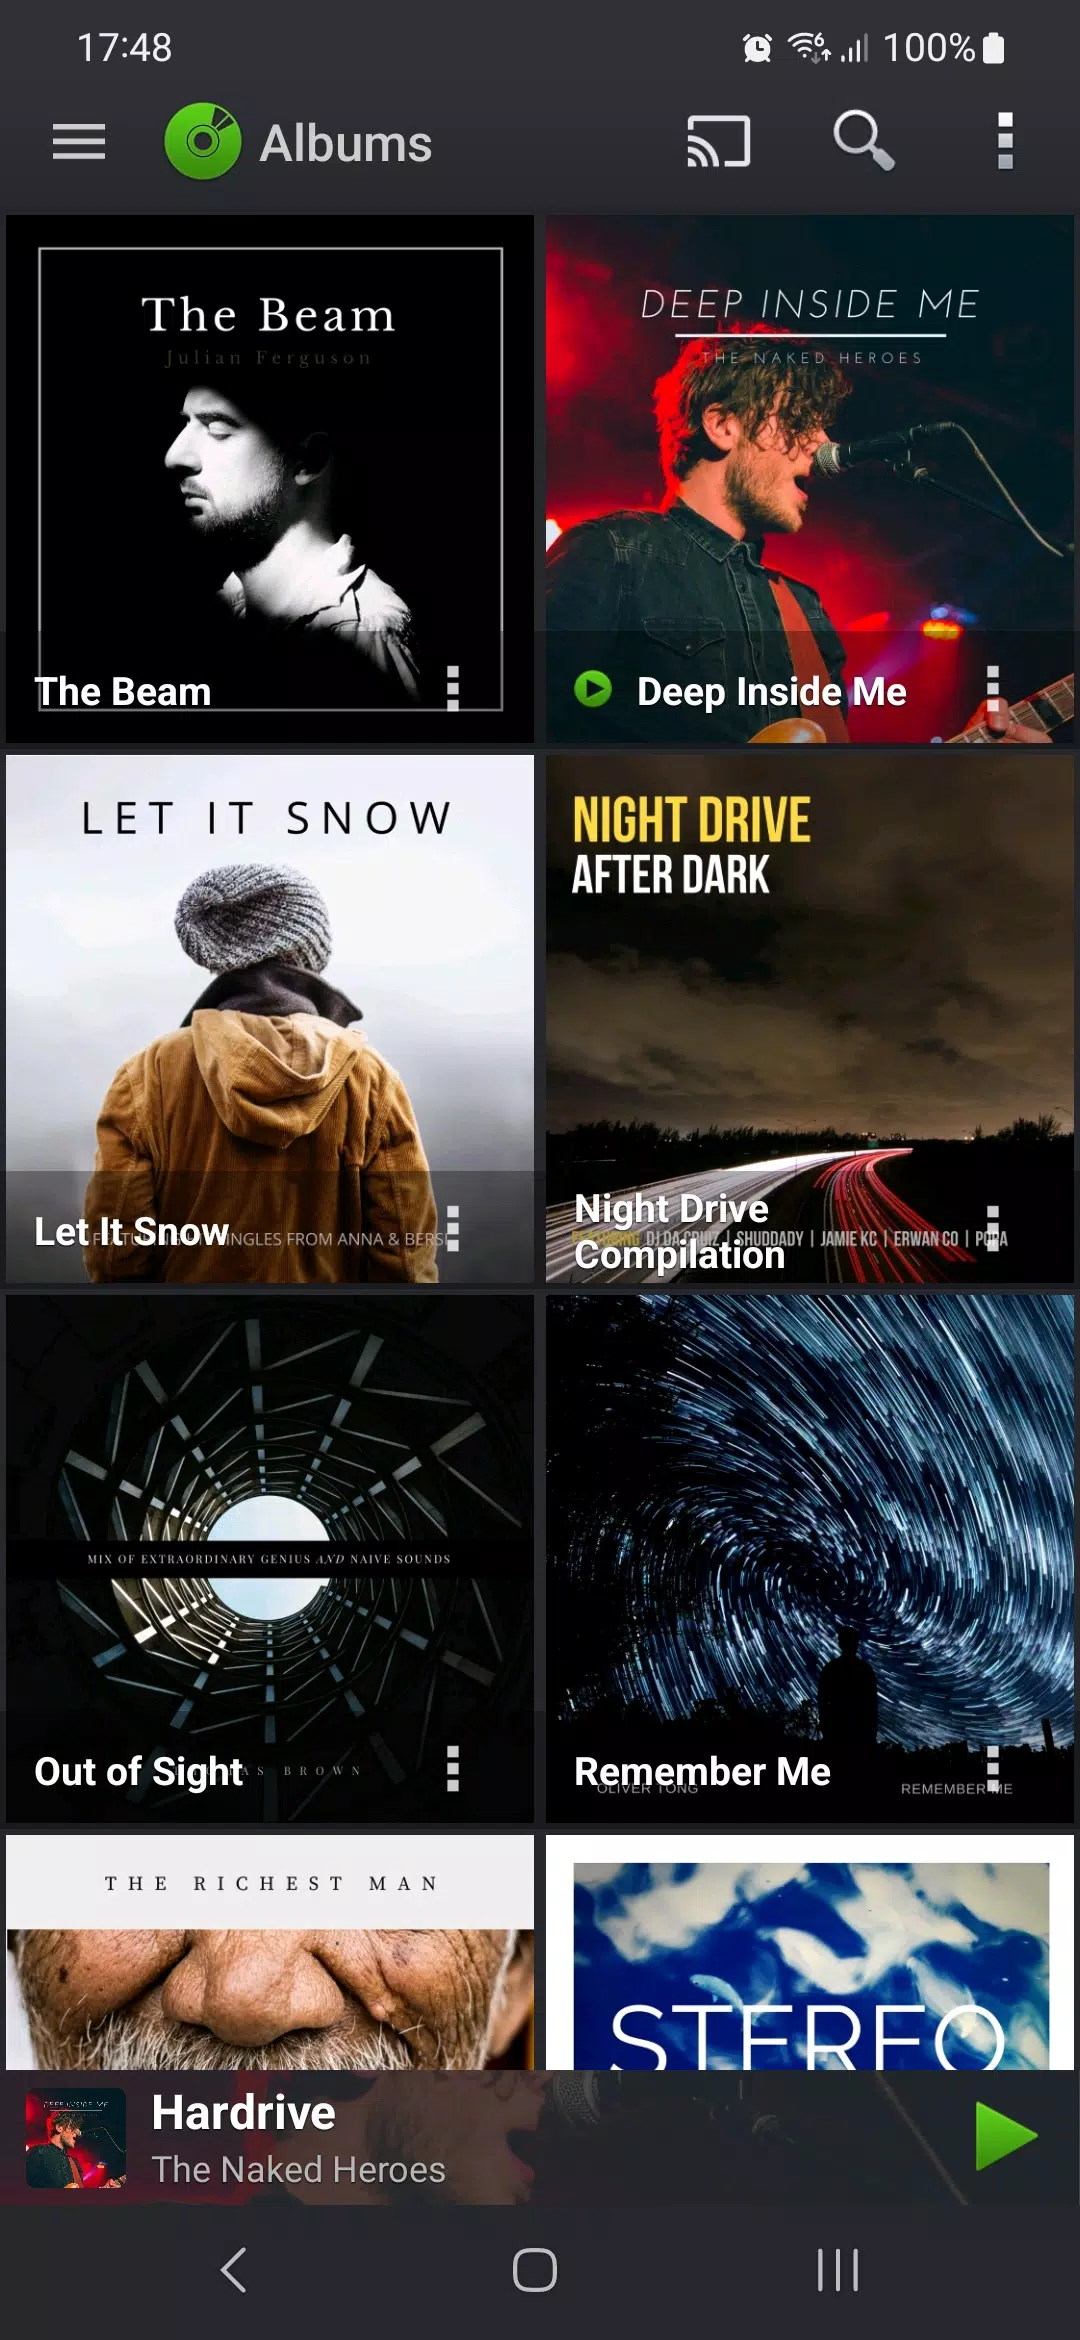 PlayerPro Music Player MOD APK for Android Free Download